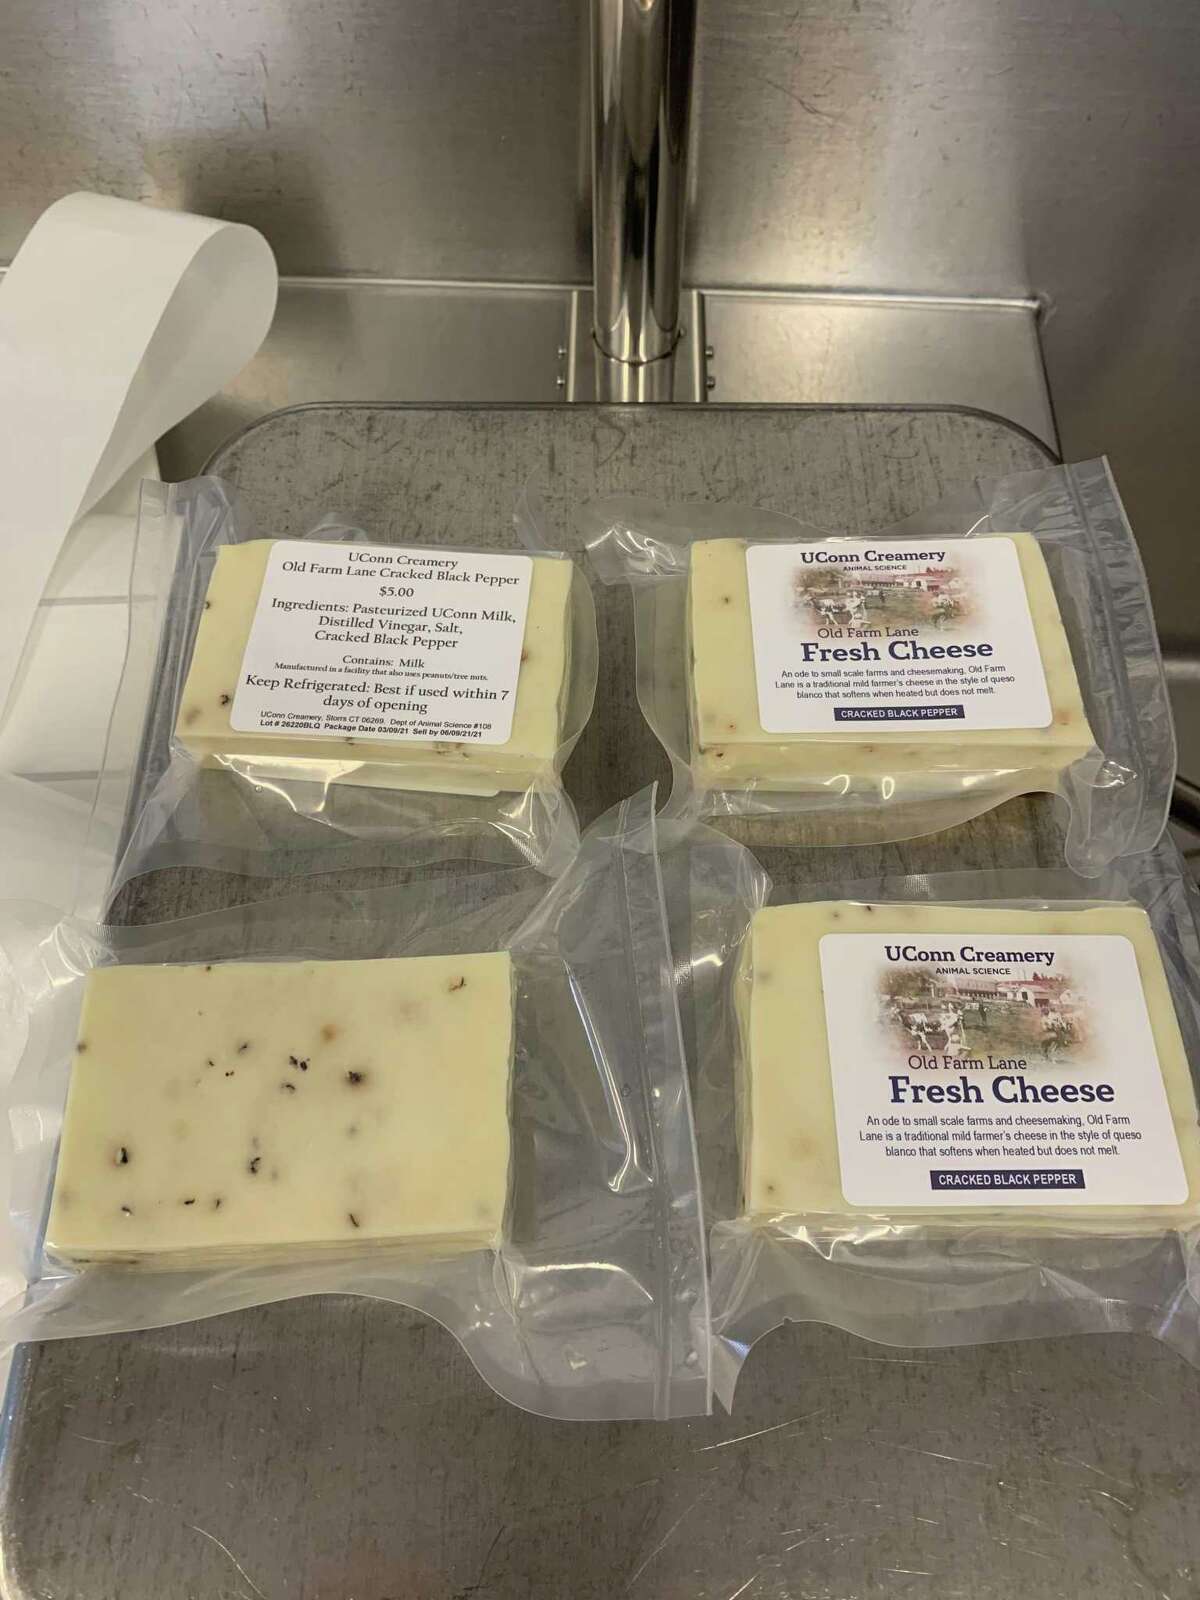 Cheese made at the UConn creamery and sold at the iconic university Dairy Bar.